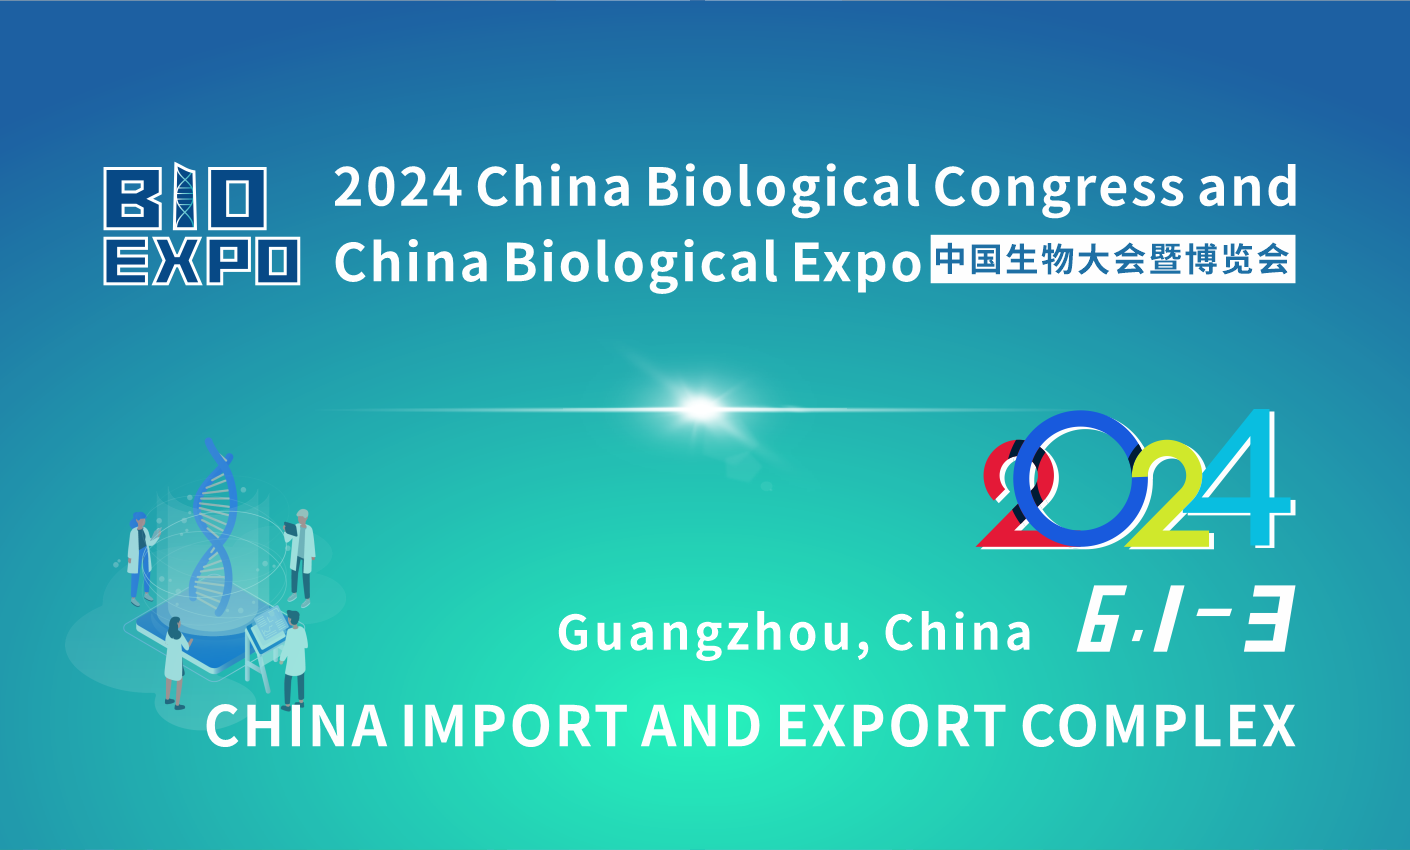 China Biotech Conference and China Biotech Expo